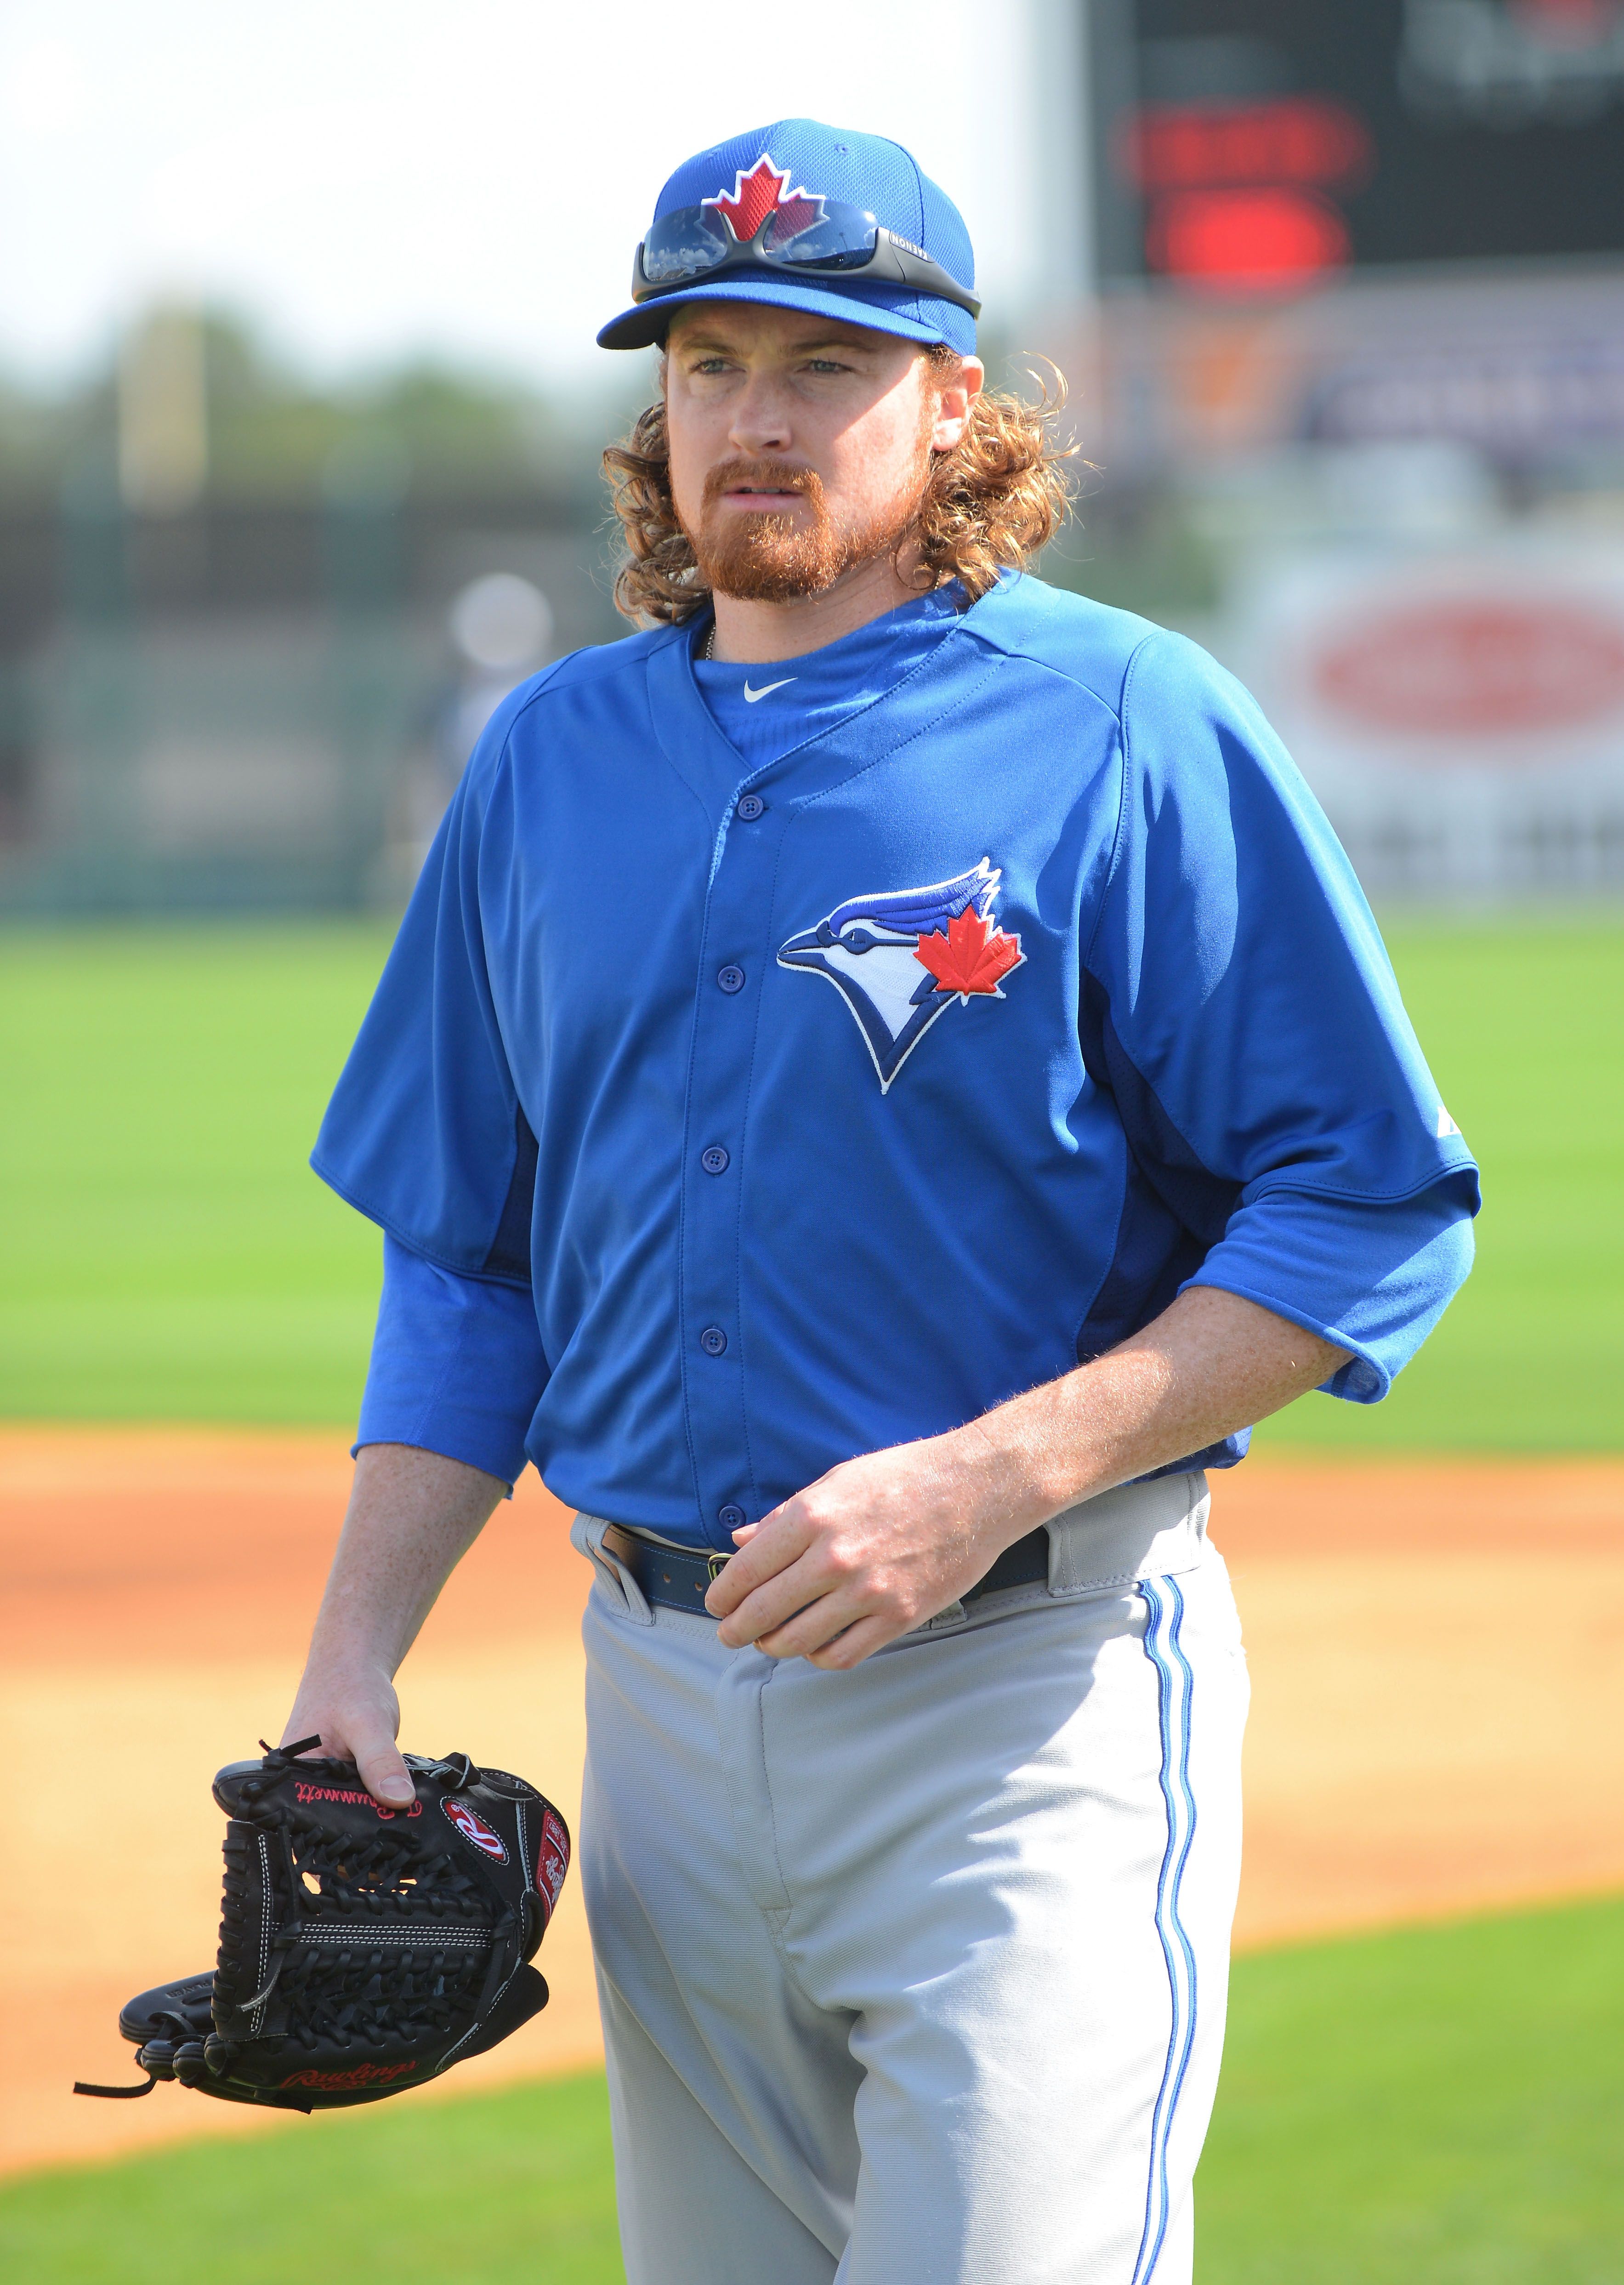 Late Tyson Brummett #78 of the Toronto Blue Jays at the spring training game against the Detroit Tigers on February 23, 2013 in Lakeland, Florida | Photo: Getty Images